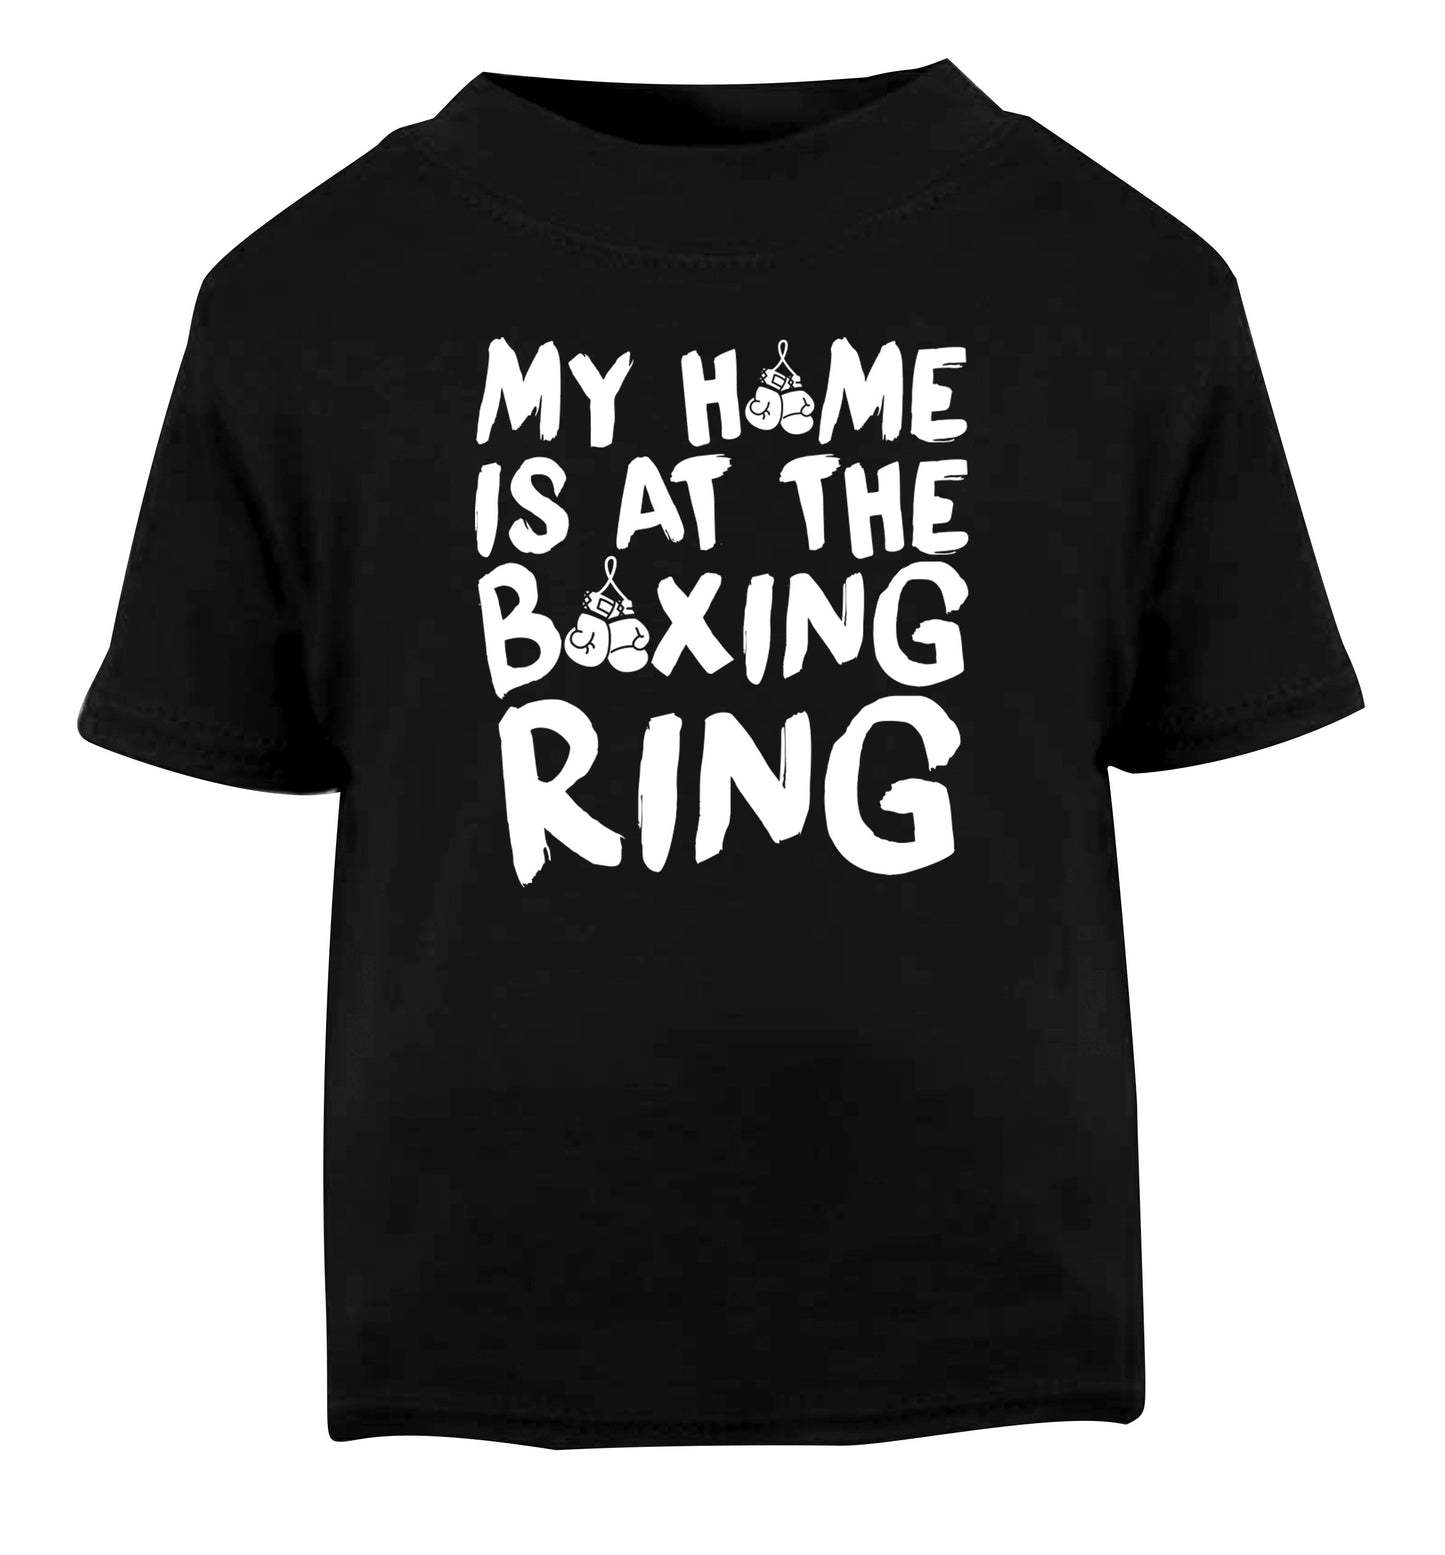 My home is at the boxing ring Black Baby Toddler Tshirt 2 years